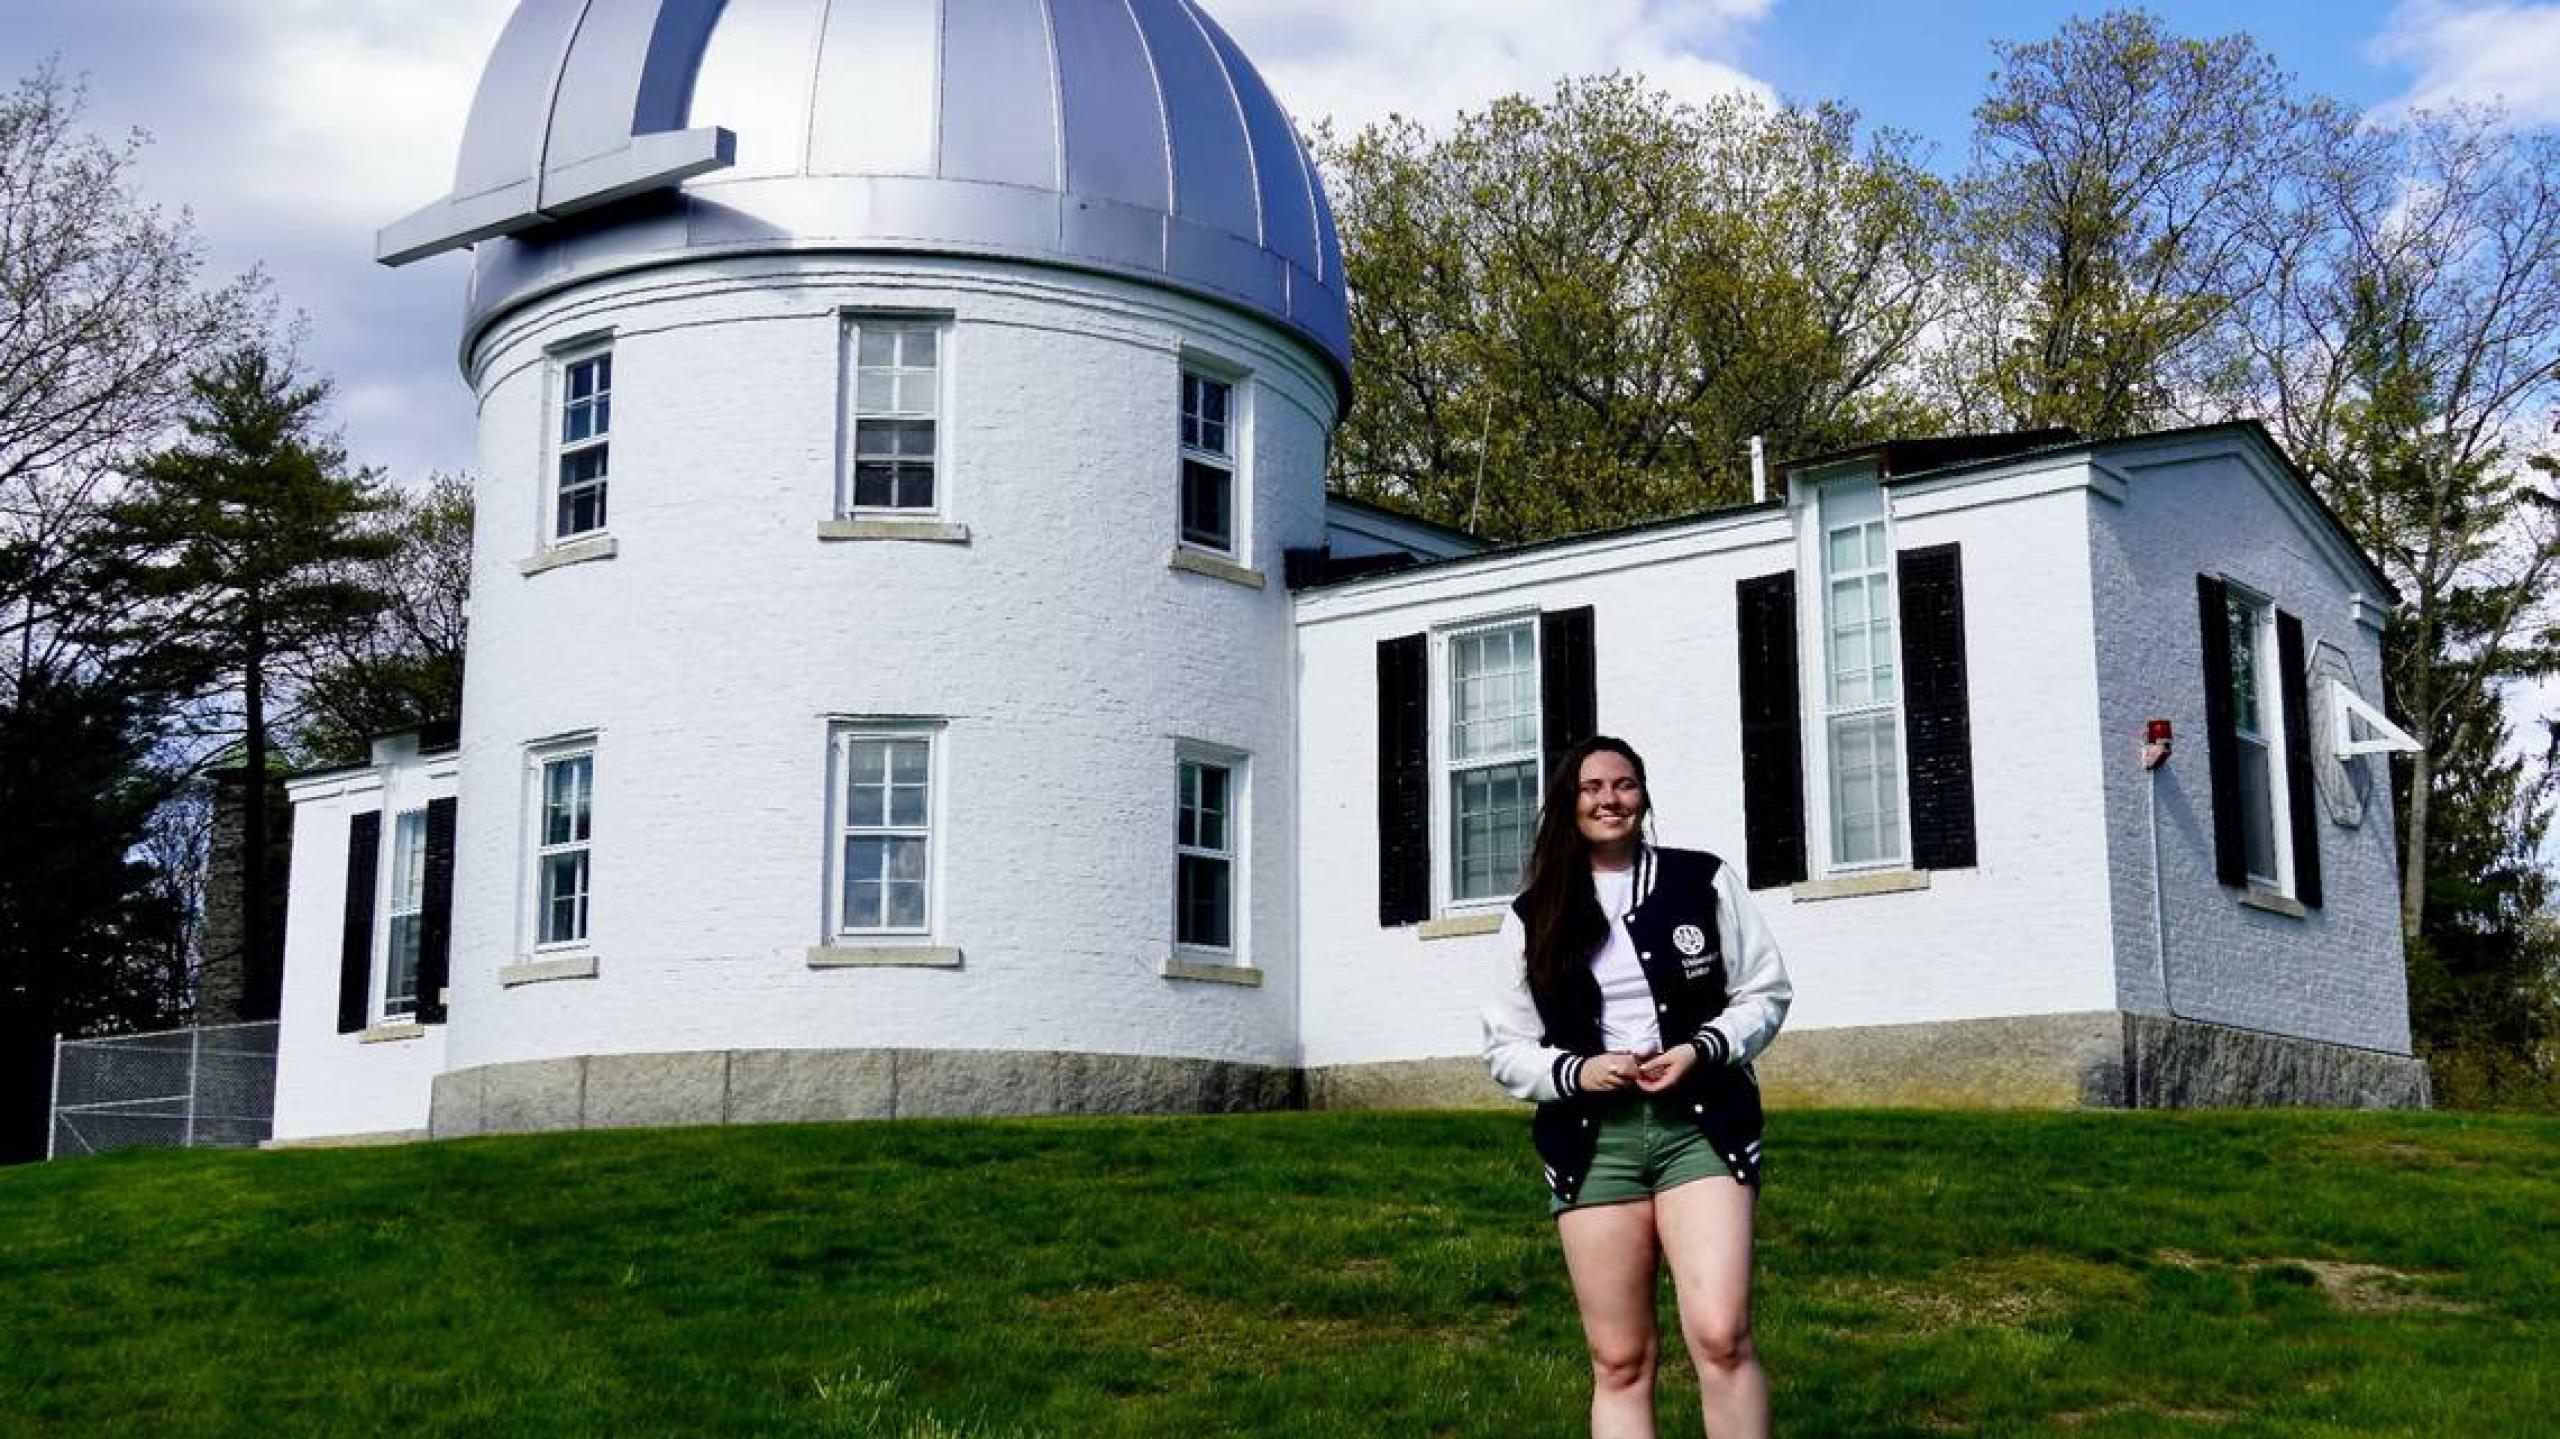 Photo of Catherine Slaughter, Central Idaho Dark Sky Reserve’s new astronomer-in-residence, standing in front of the Shattuck Observatory at Catherine’s alma mater, Dartmouth.